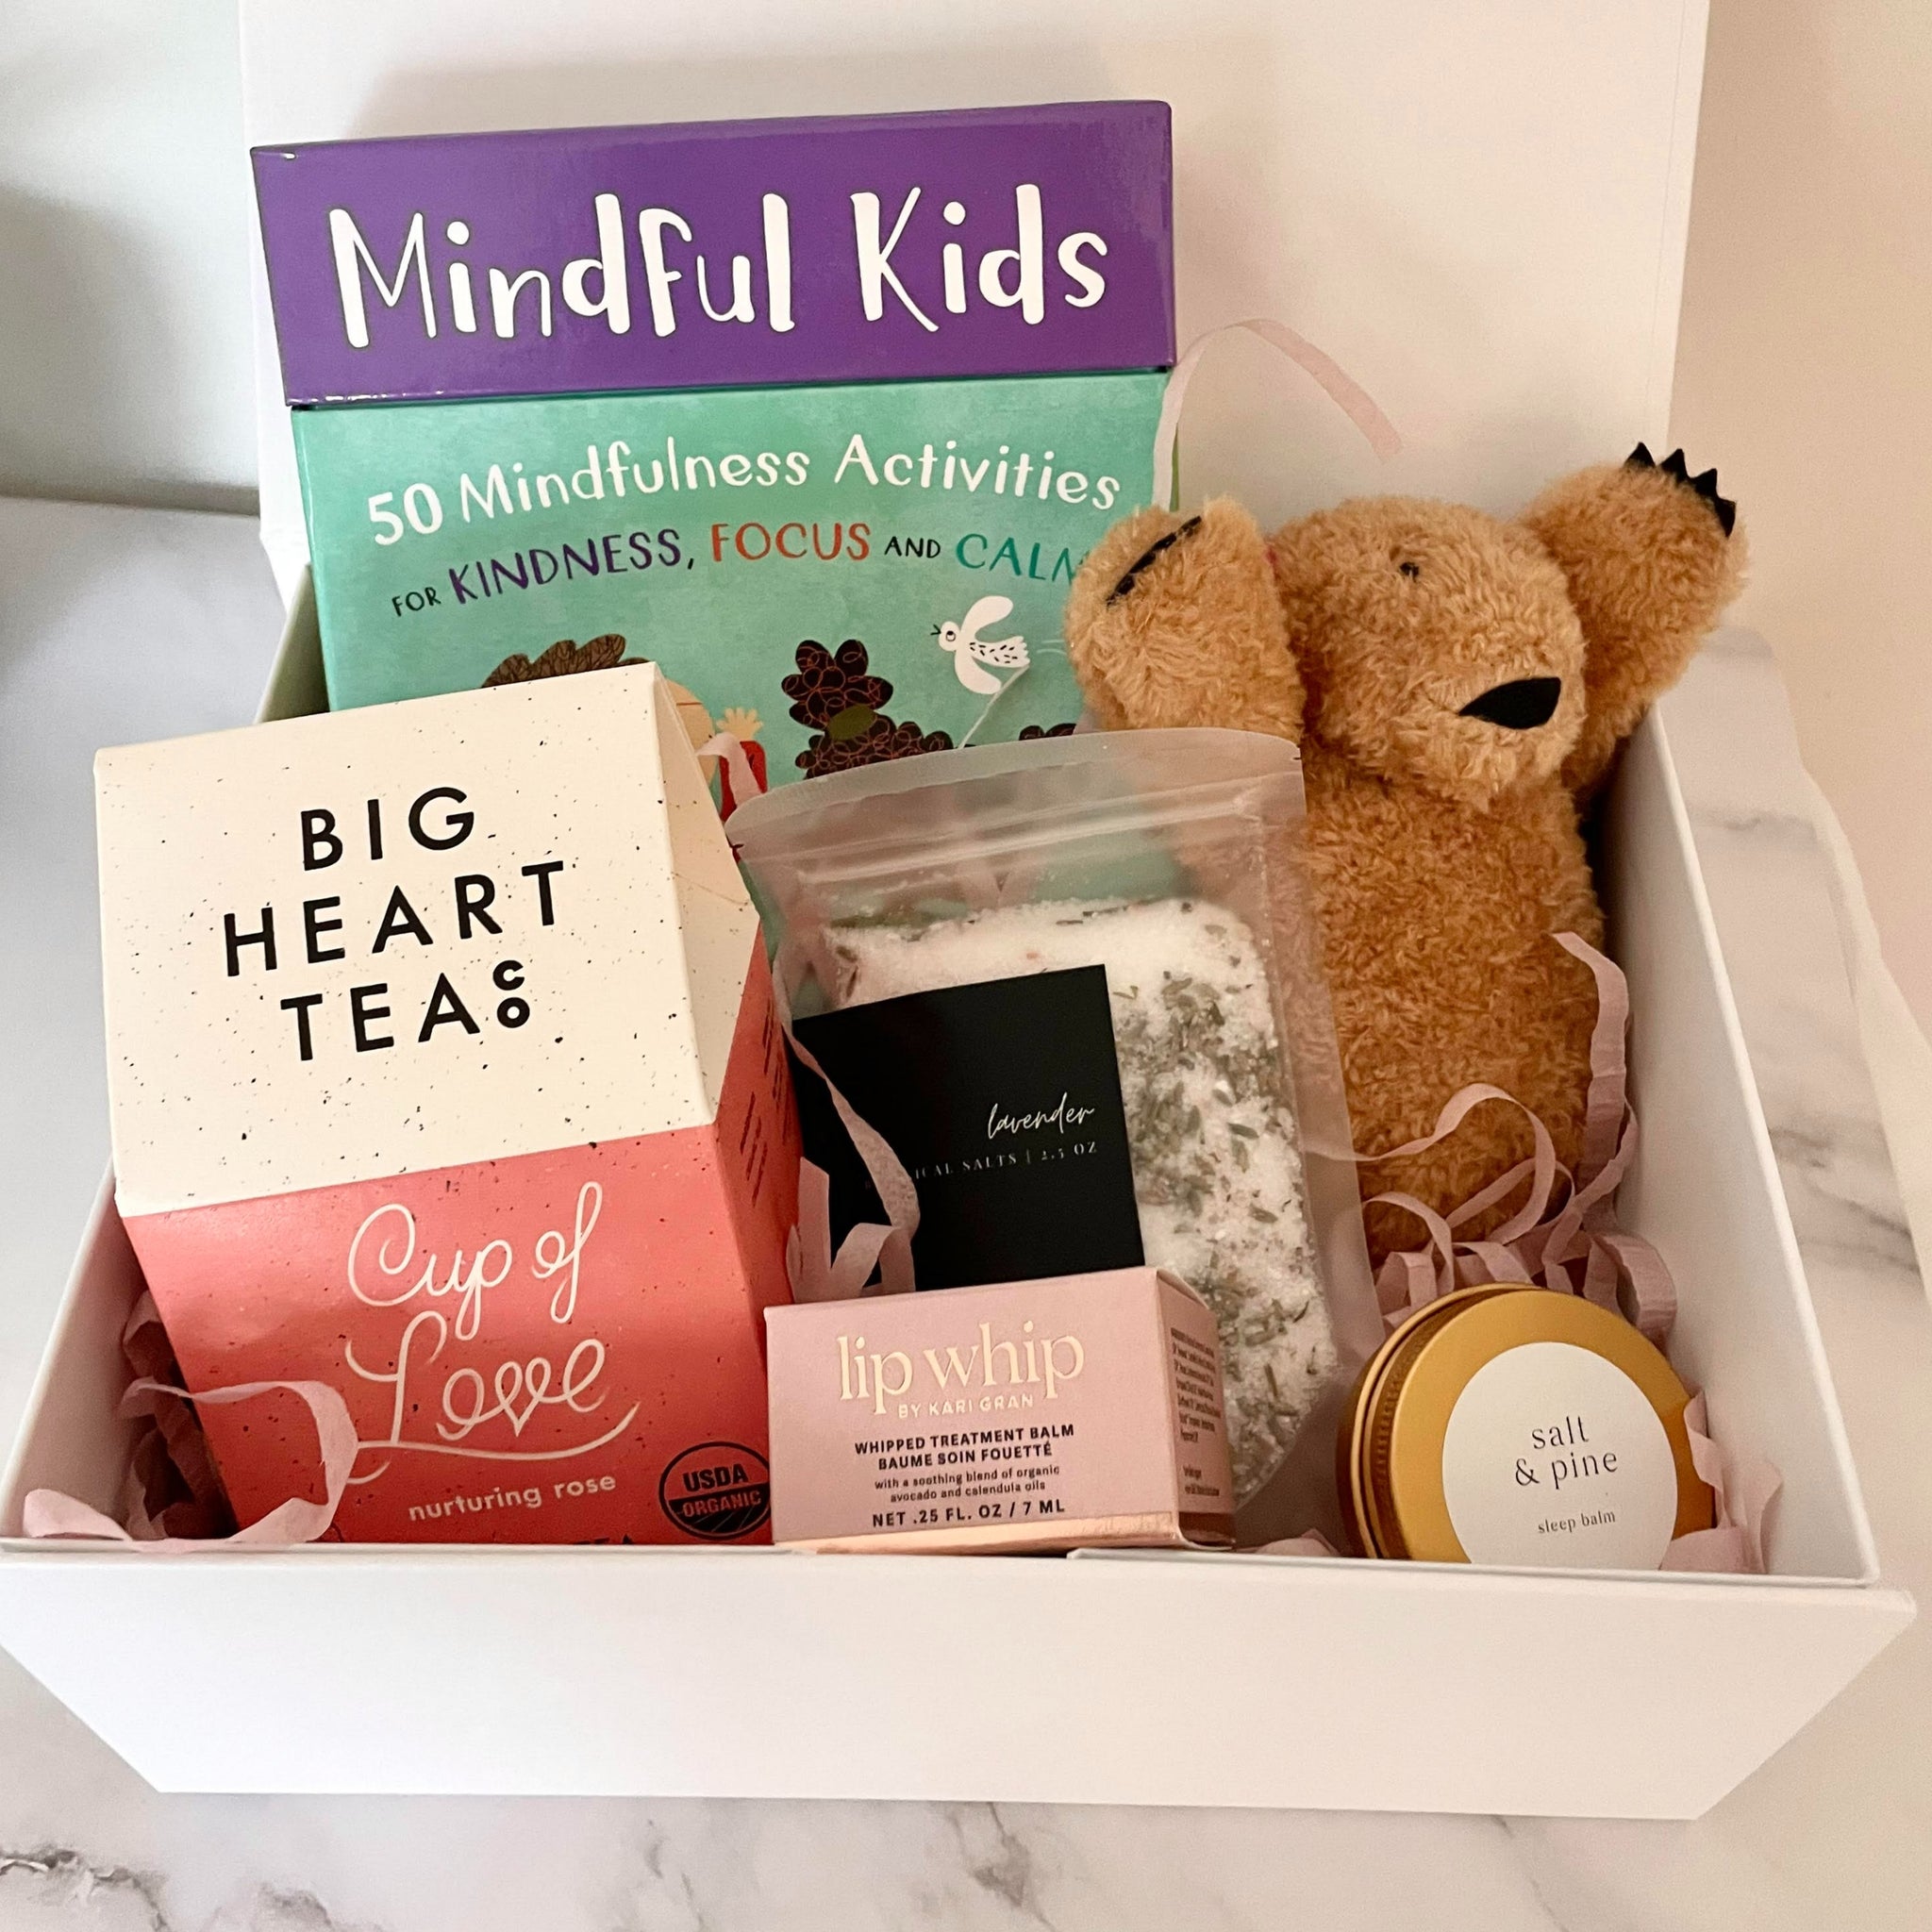 picture featuring a family support themed care package for families going through difficult chapters of life. Included in the gift are mindfulness cards for kids, a small plush bear, cup of love tea, lip whip moisturizing lip balm, lavender bath salts and sleep balm